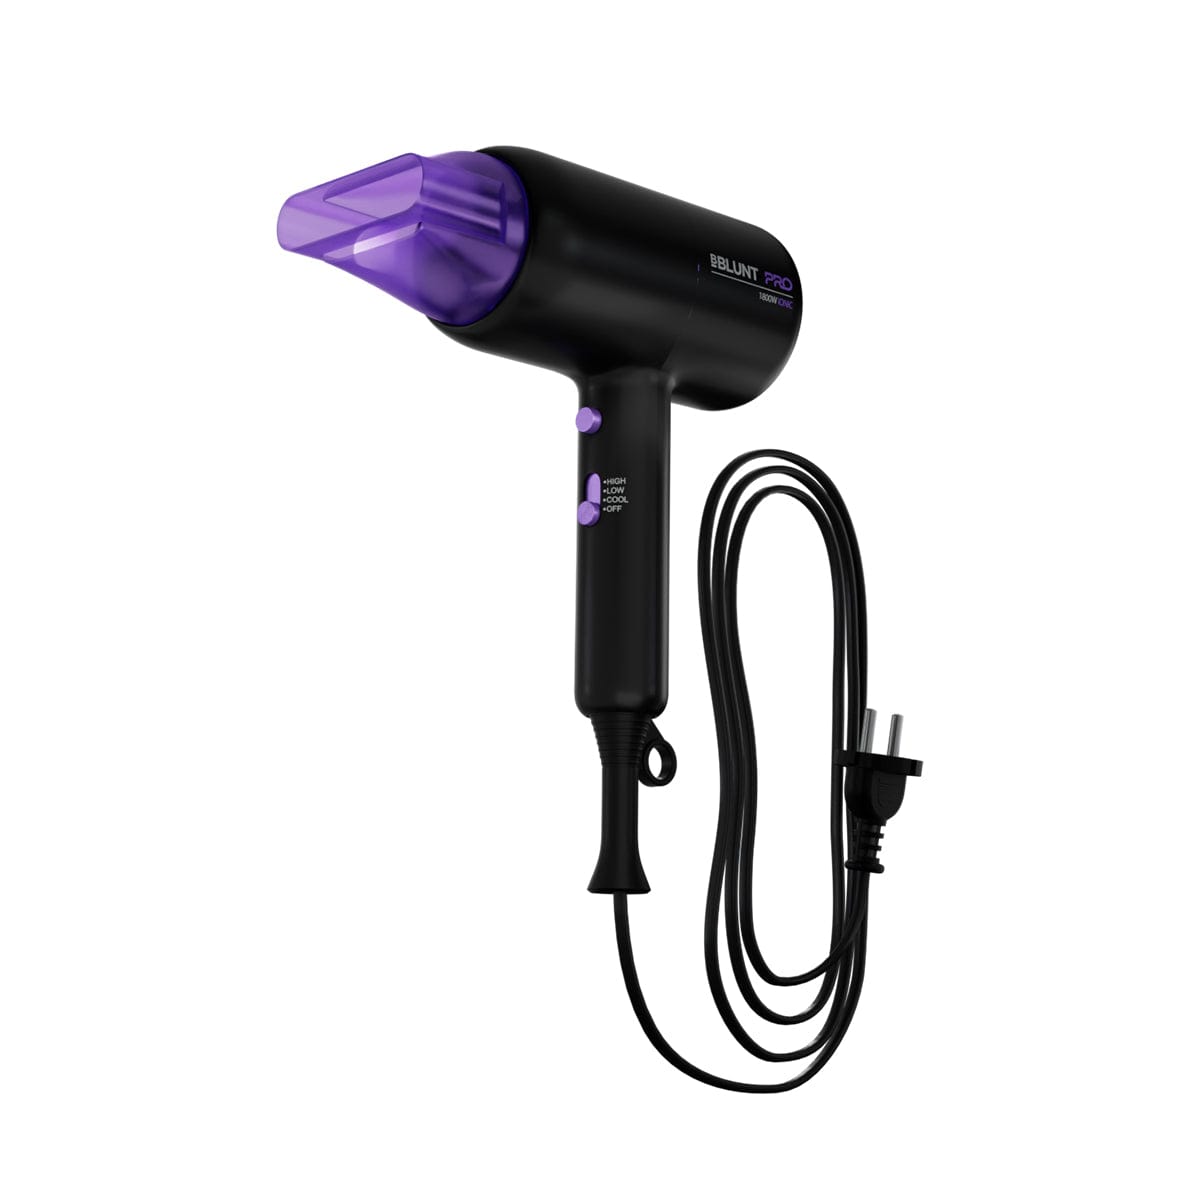 Pro 1800W Ionic Hair Dryer  Ionic Technology |Powerful Drying | Salon-Like Results